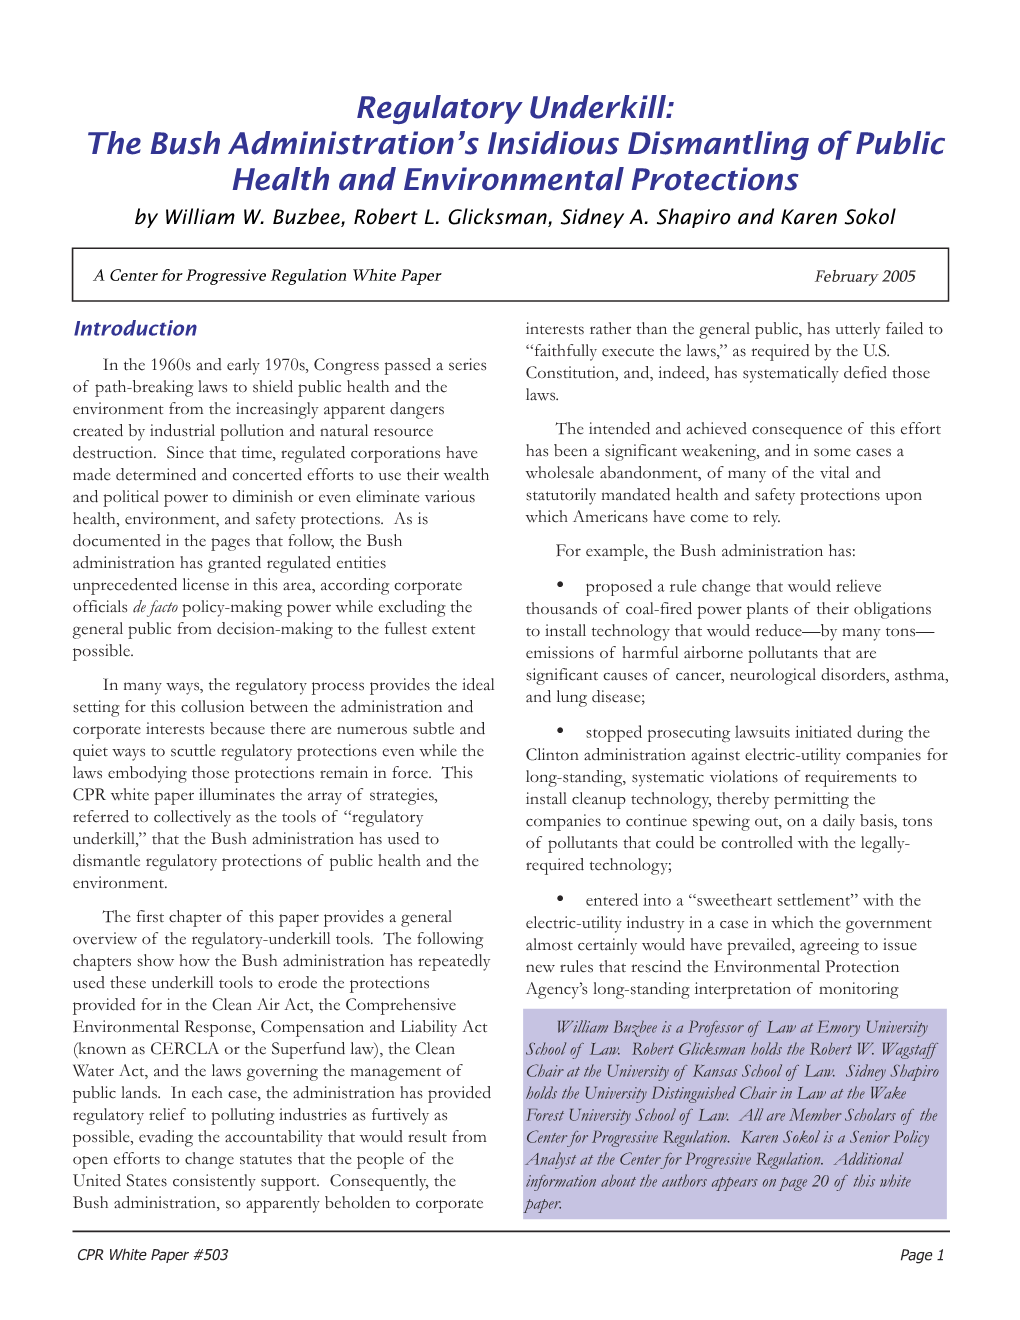 Regulatory Underkill: the Bush Administration’S Insidious Dismantling of Public Health and Environmental Protections by William W